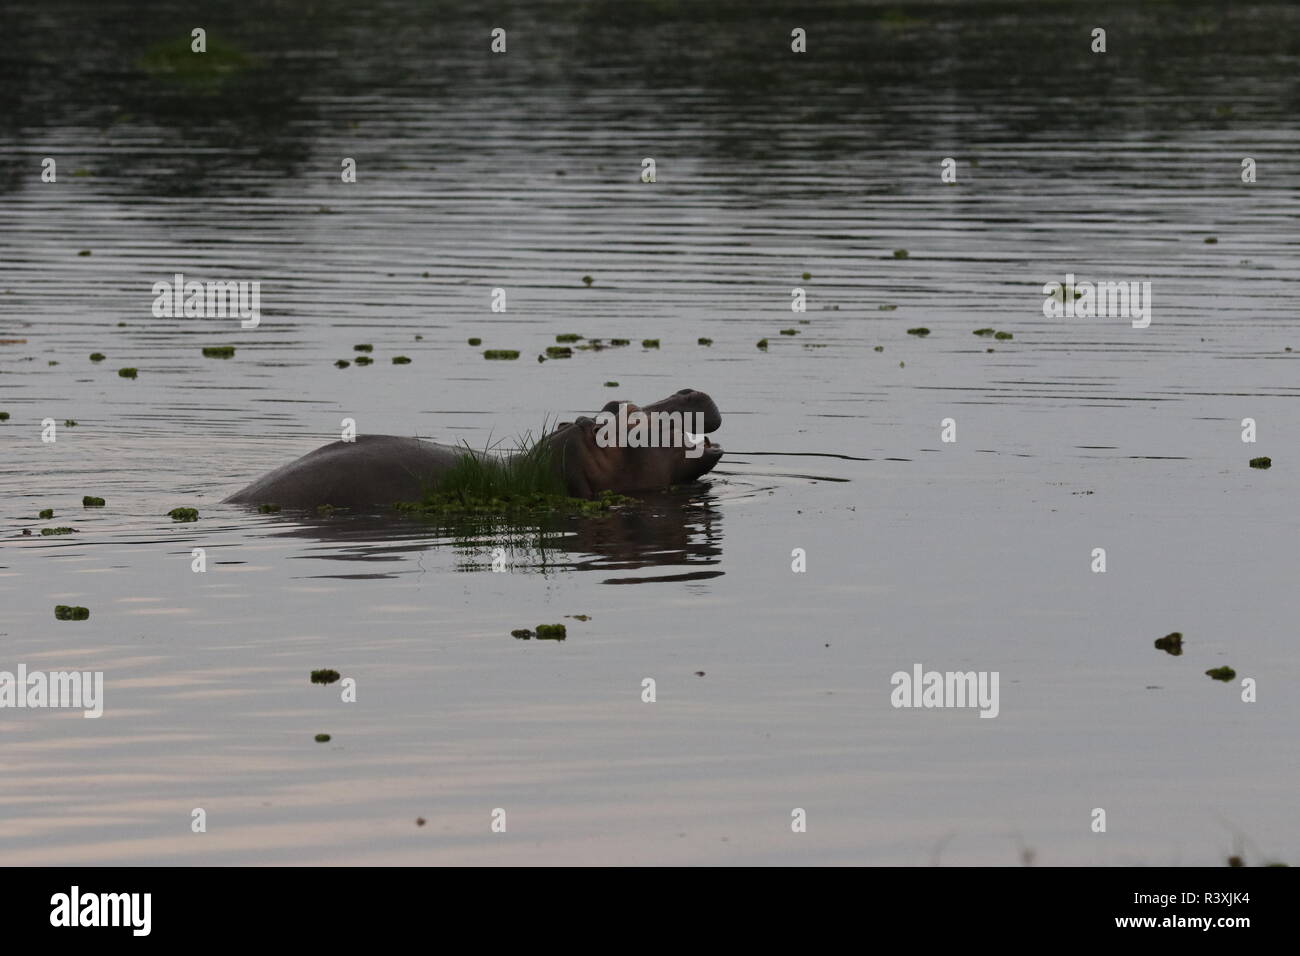 Young Hippo (Hippopotamus amphibious) mouth partly open in calm river, profile, head & upper body visible Stock Photo